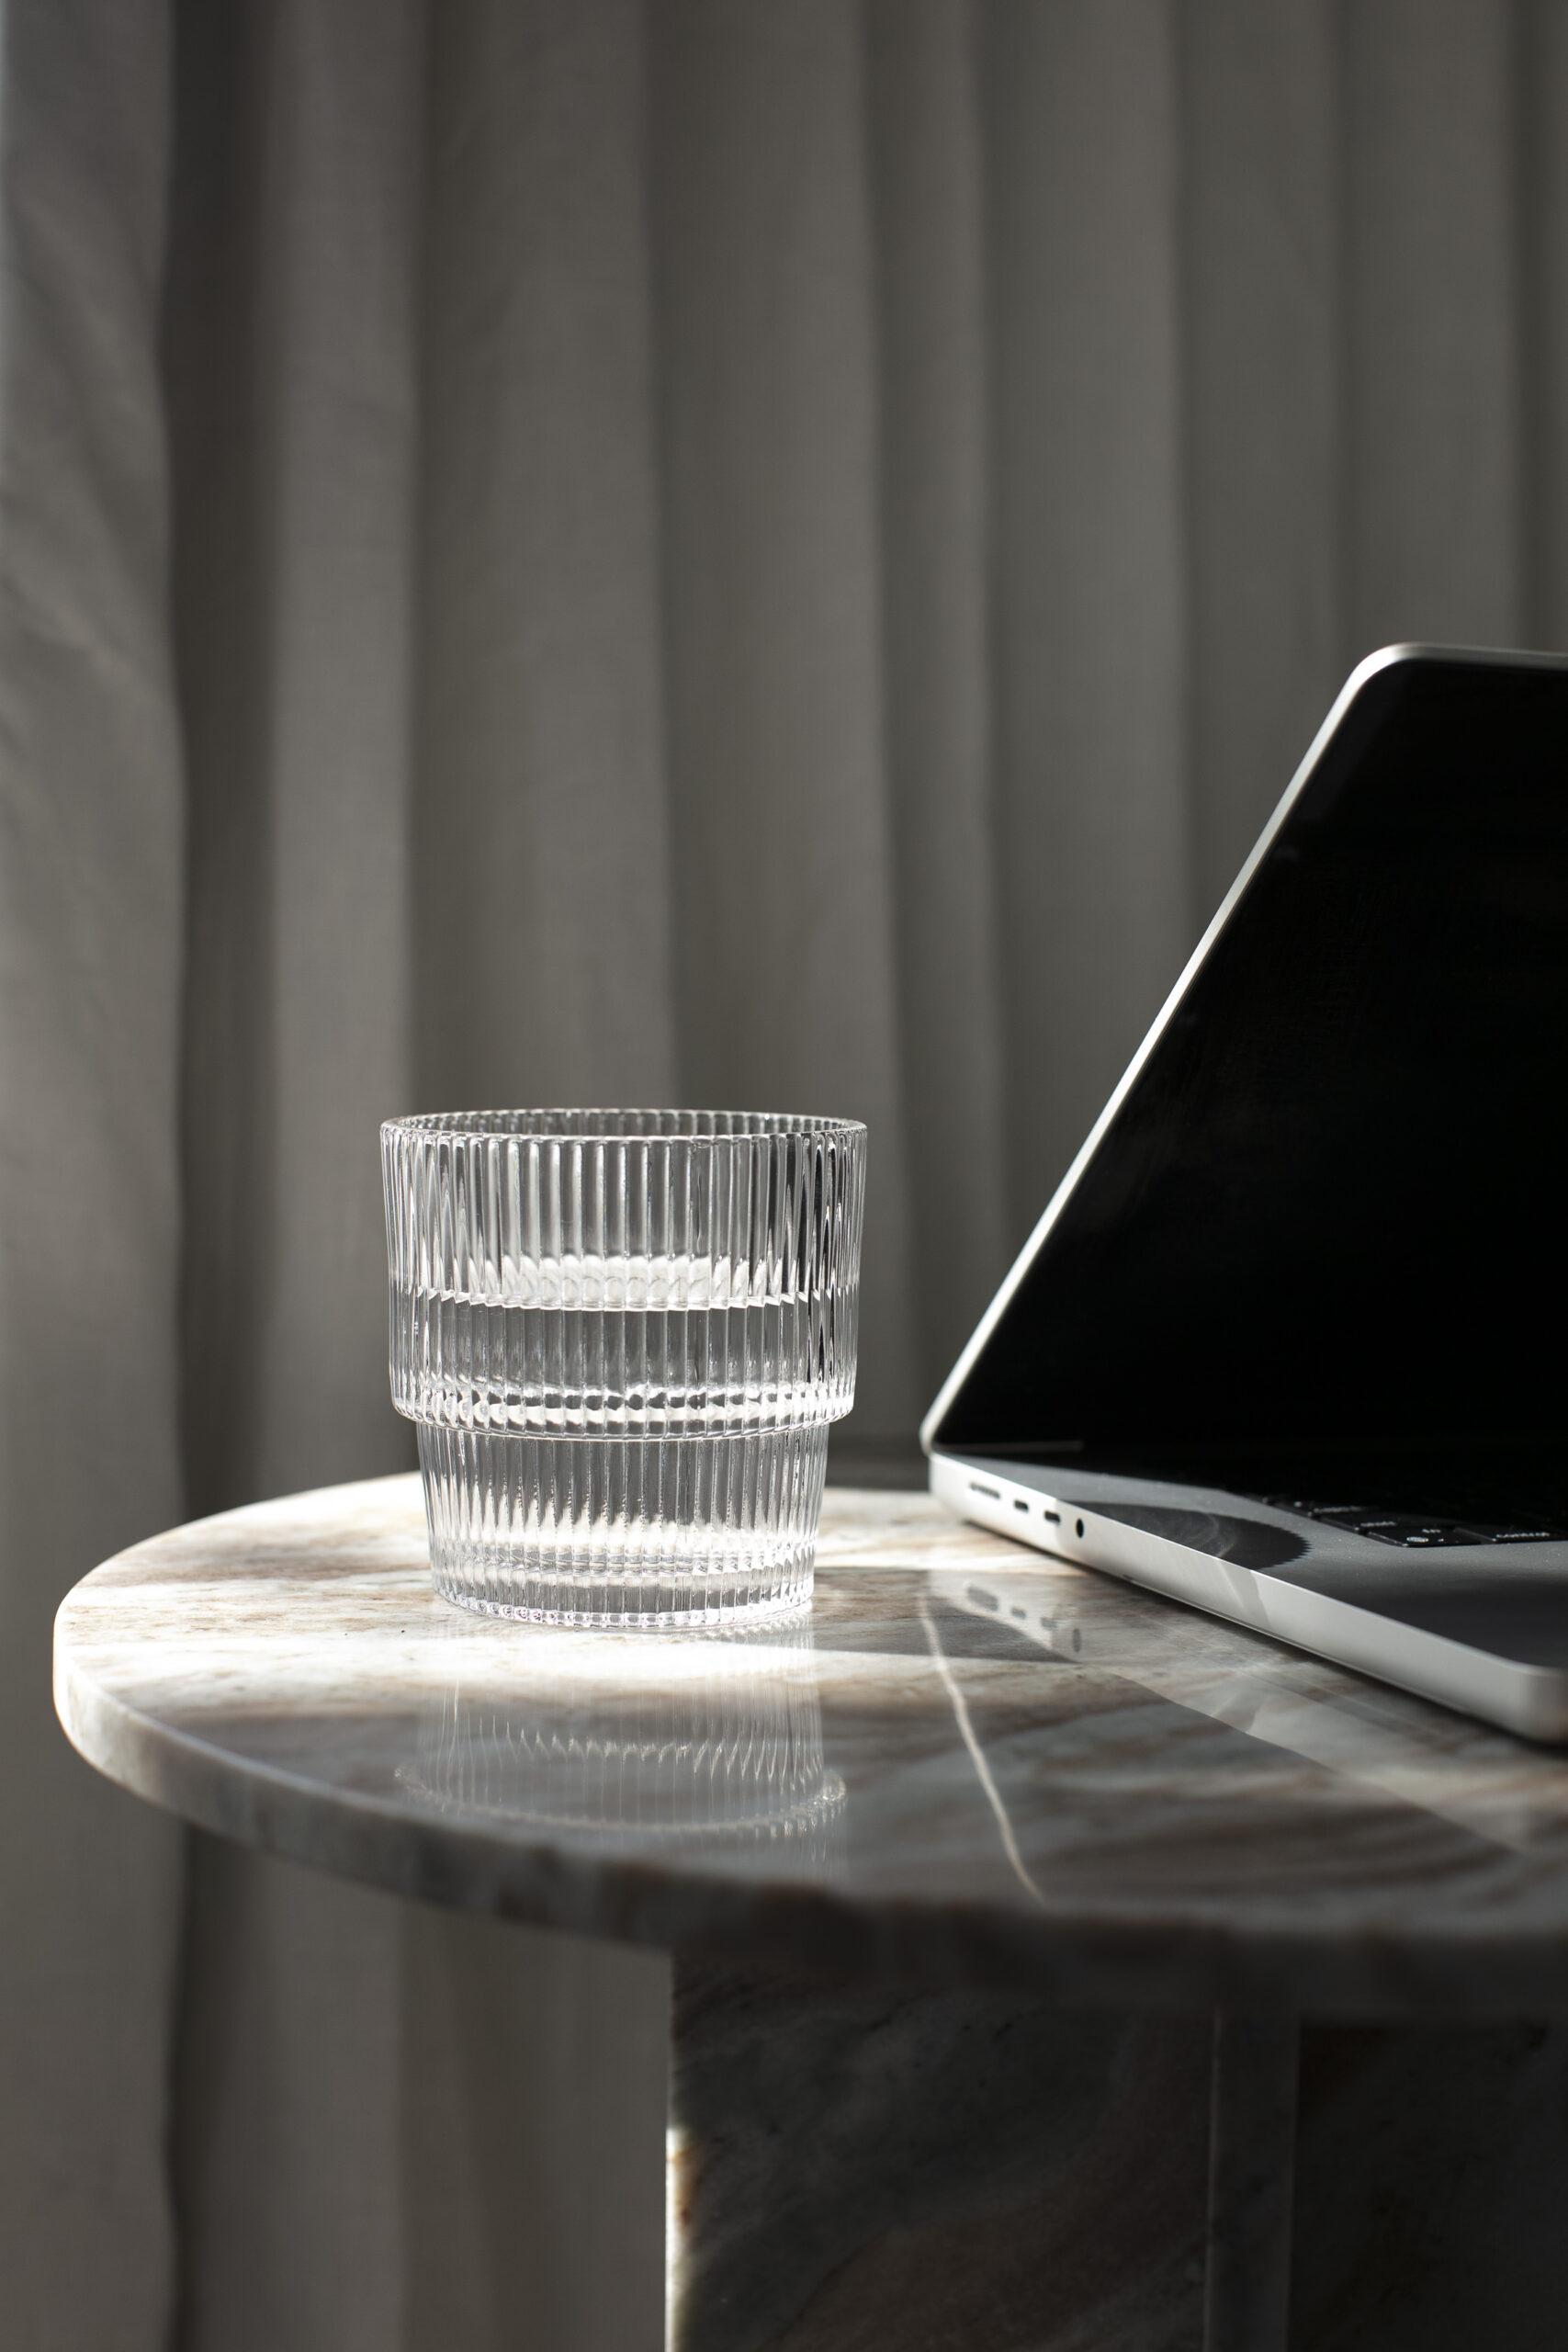 Laptop partially open and glass of water on a round marble table with a dark and moody vibe